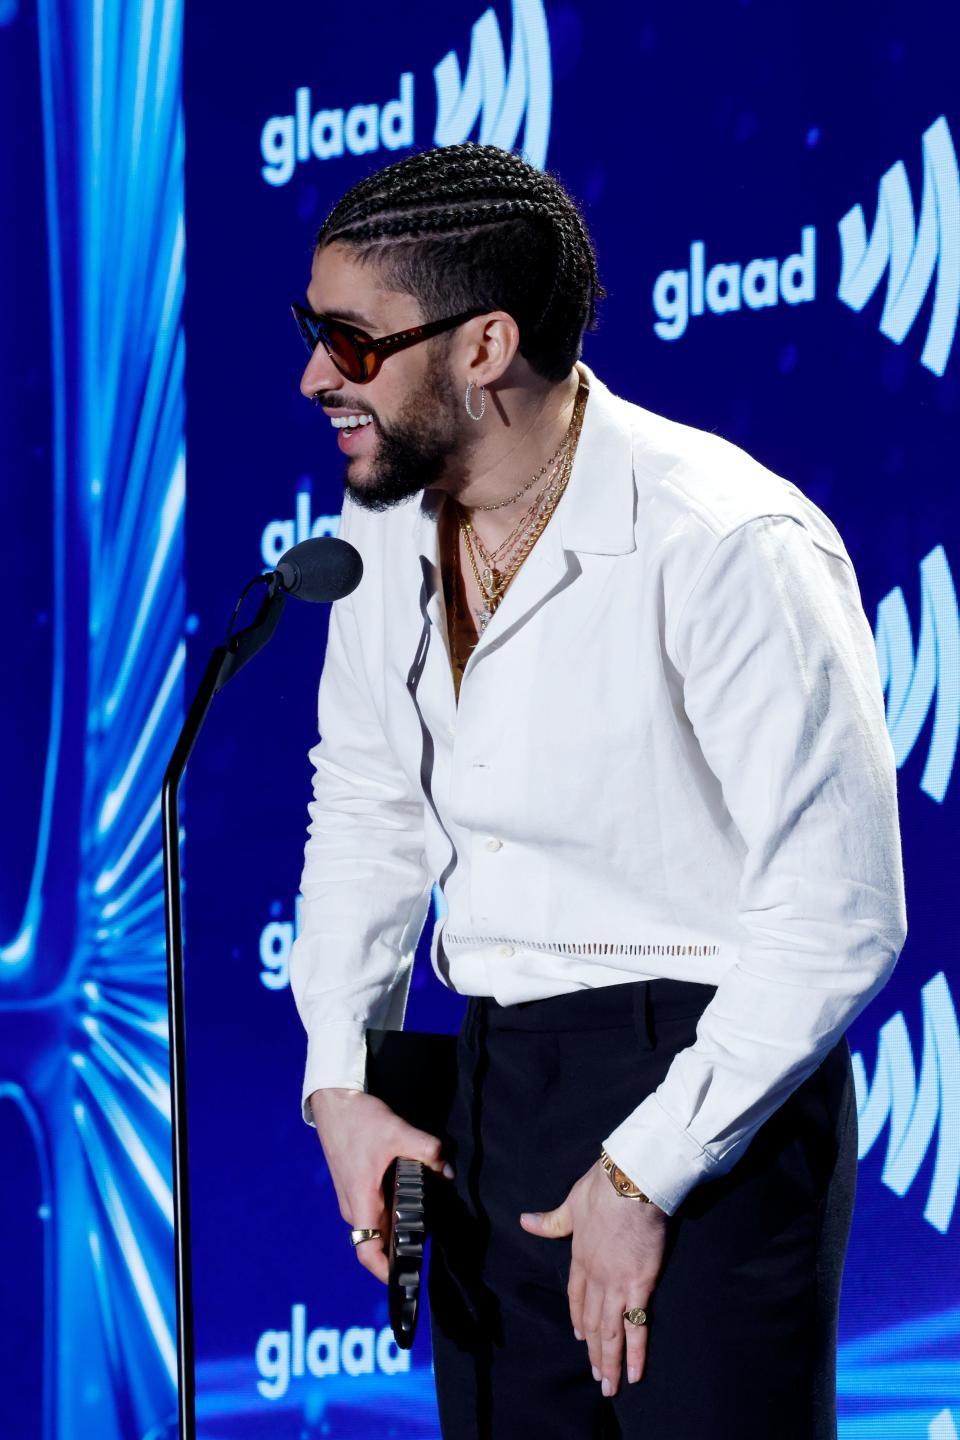 Bad Bunny speaks onstage during the GLAAD Media Awards at The Beverly Hilton on March 30, 2023, in Beverly Hills, California.